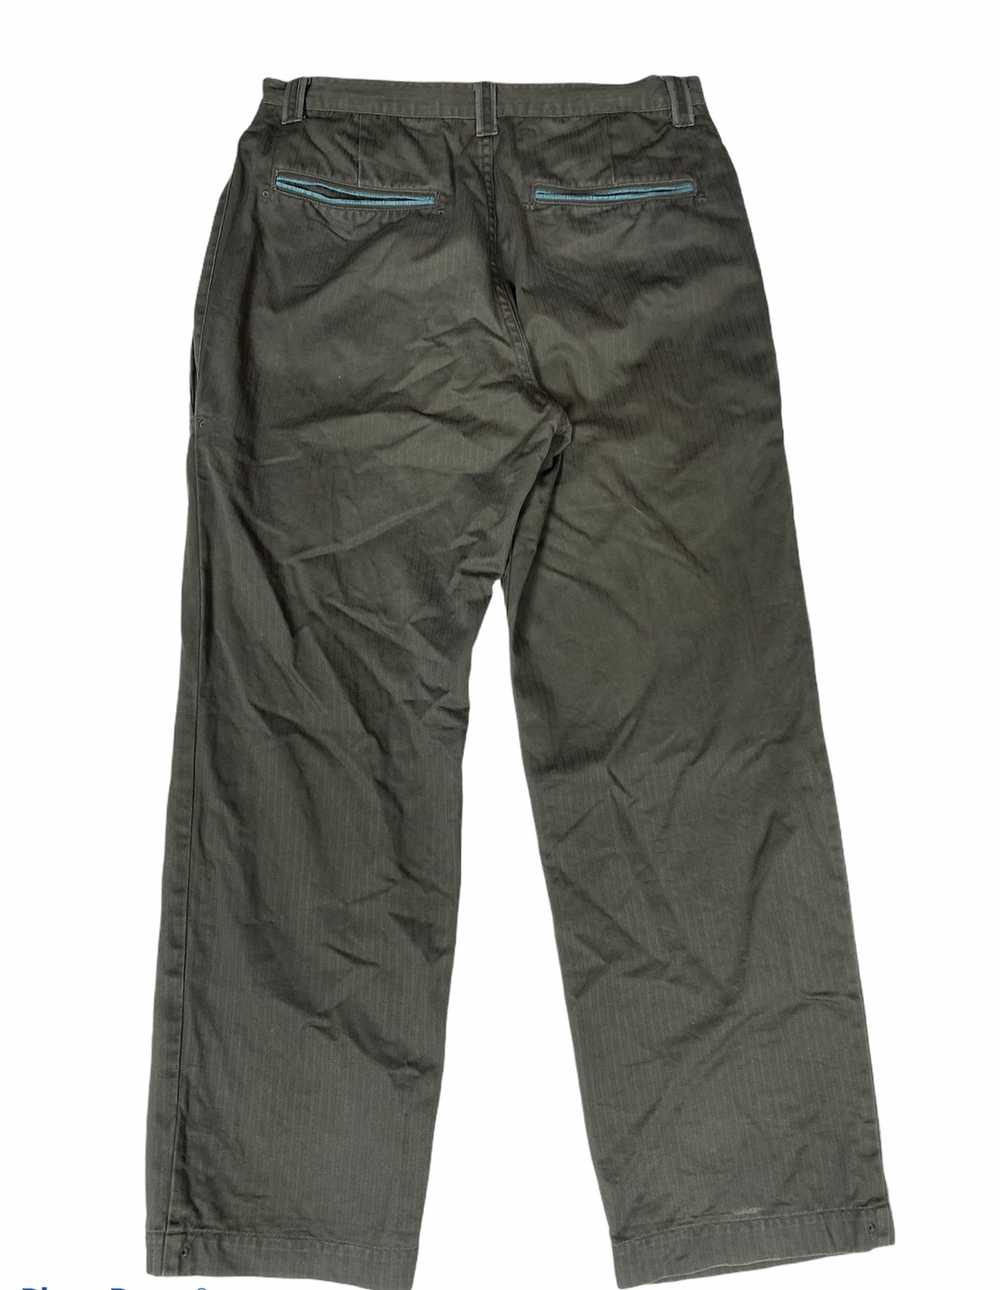 Japanese Brand - Mad Hectic Trousers Pants. S0150 - image 2